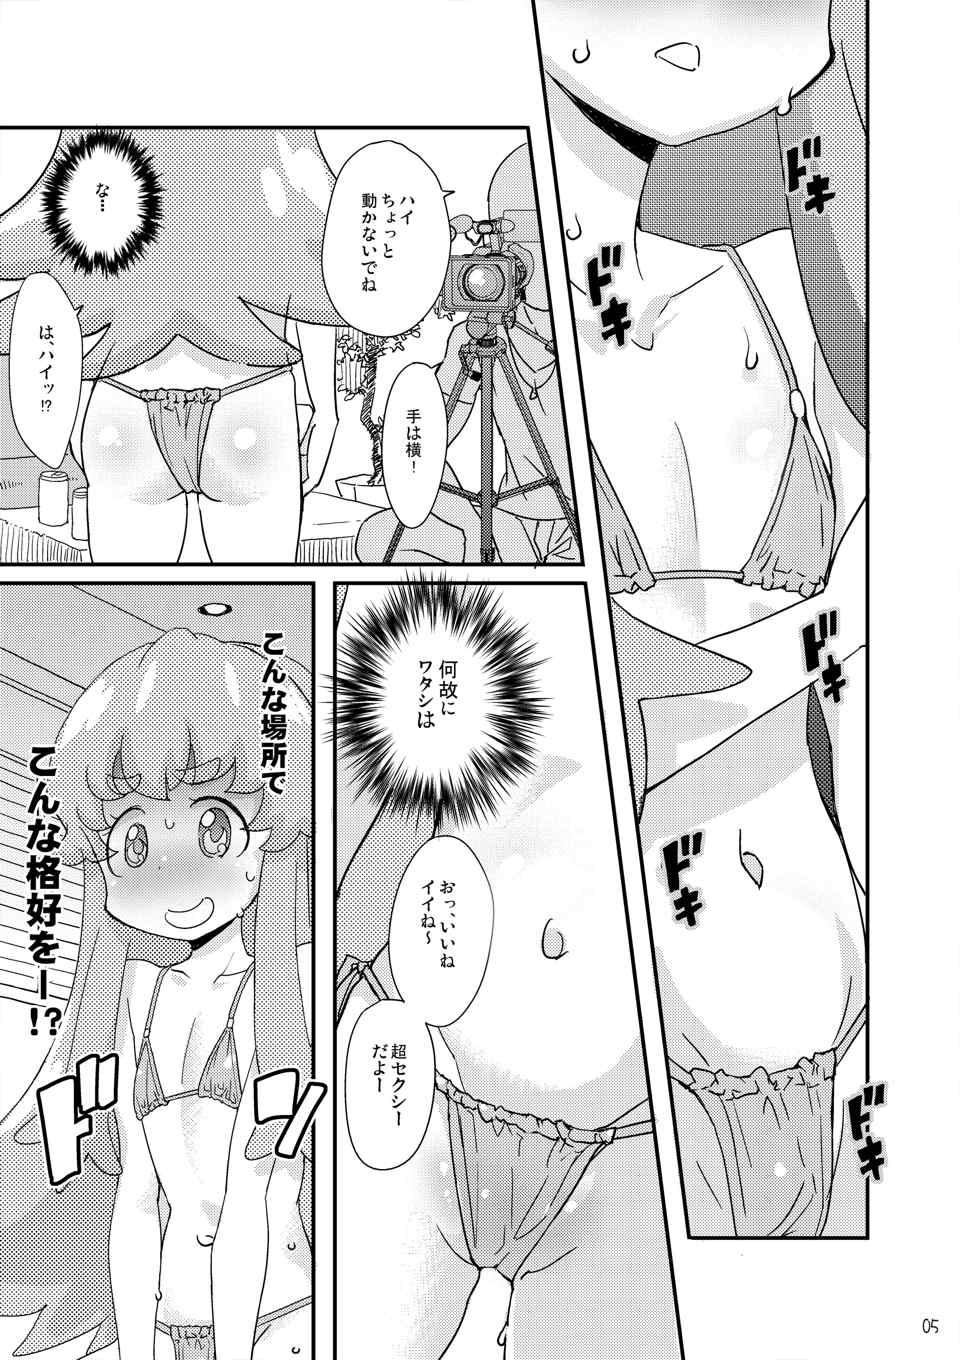 Penis HachaMecha Princess HiME-chan - Happinesscharge precure Upskirt - Page 5